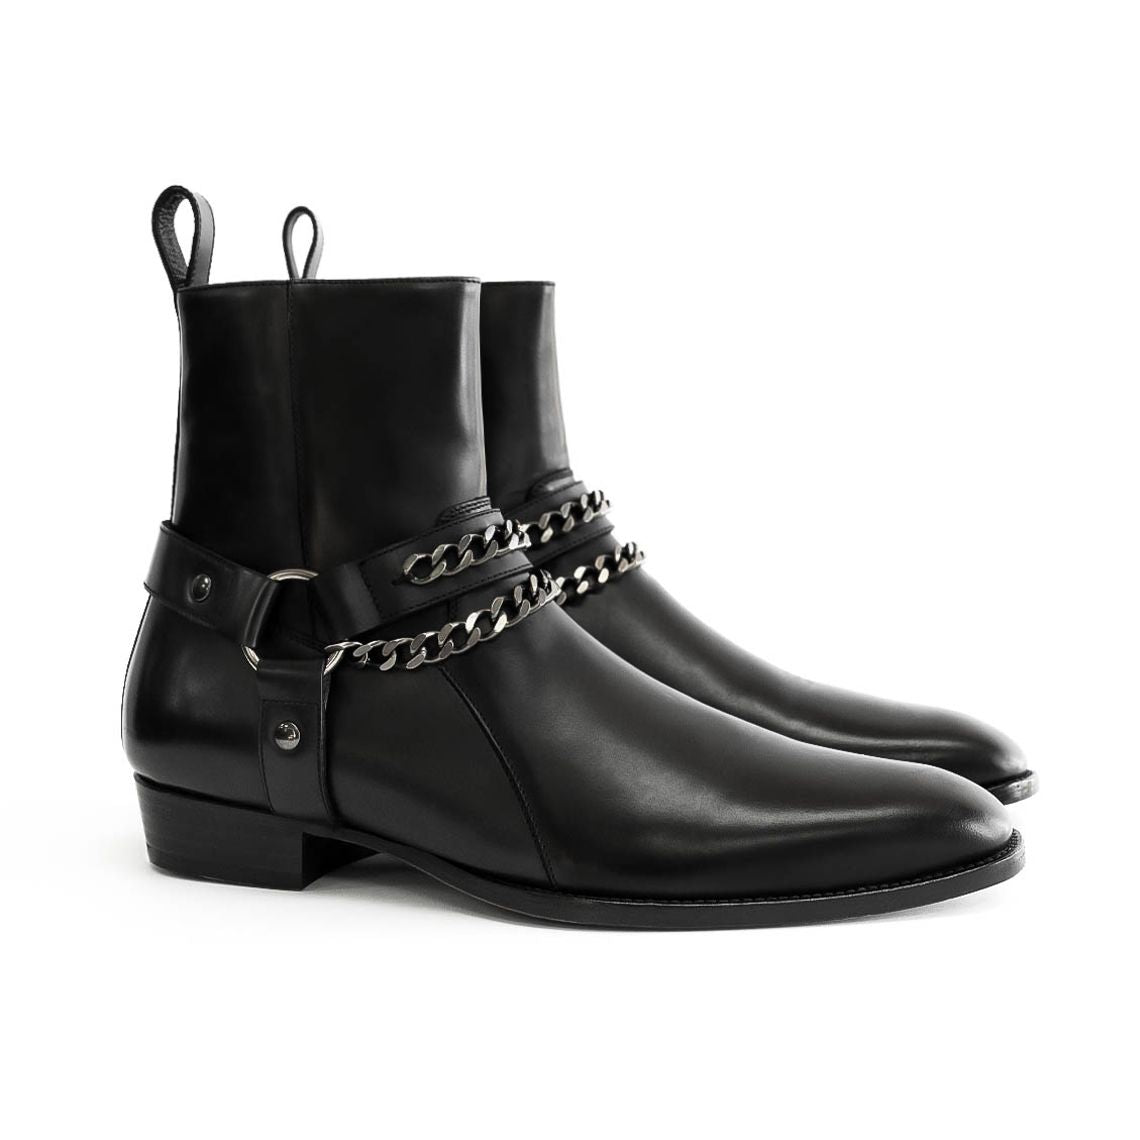 THE LEATHER HENRIK HARNESS BOOTS | ORO 